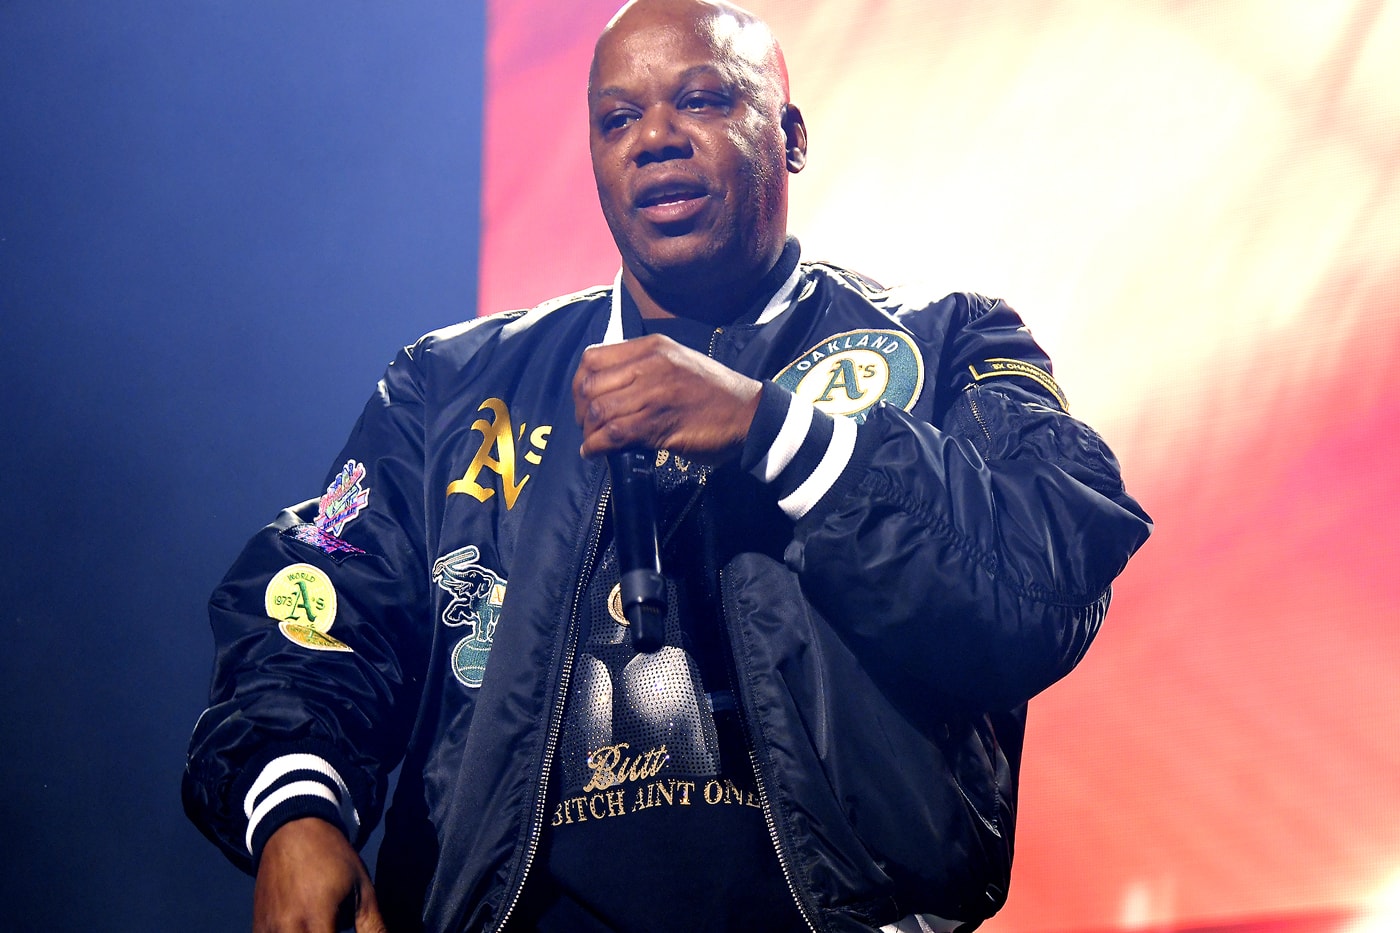 Too Short Receives Day in Oakland street renaming